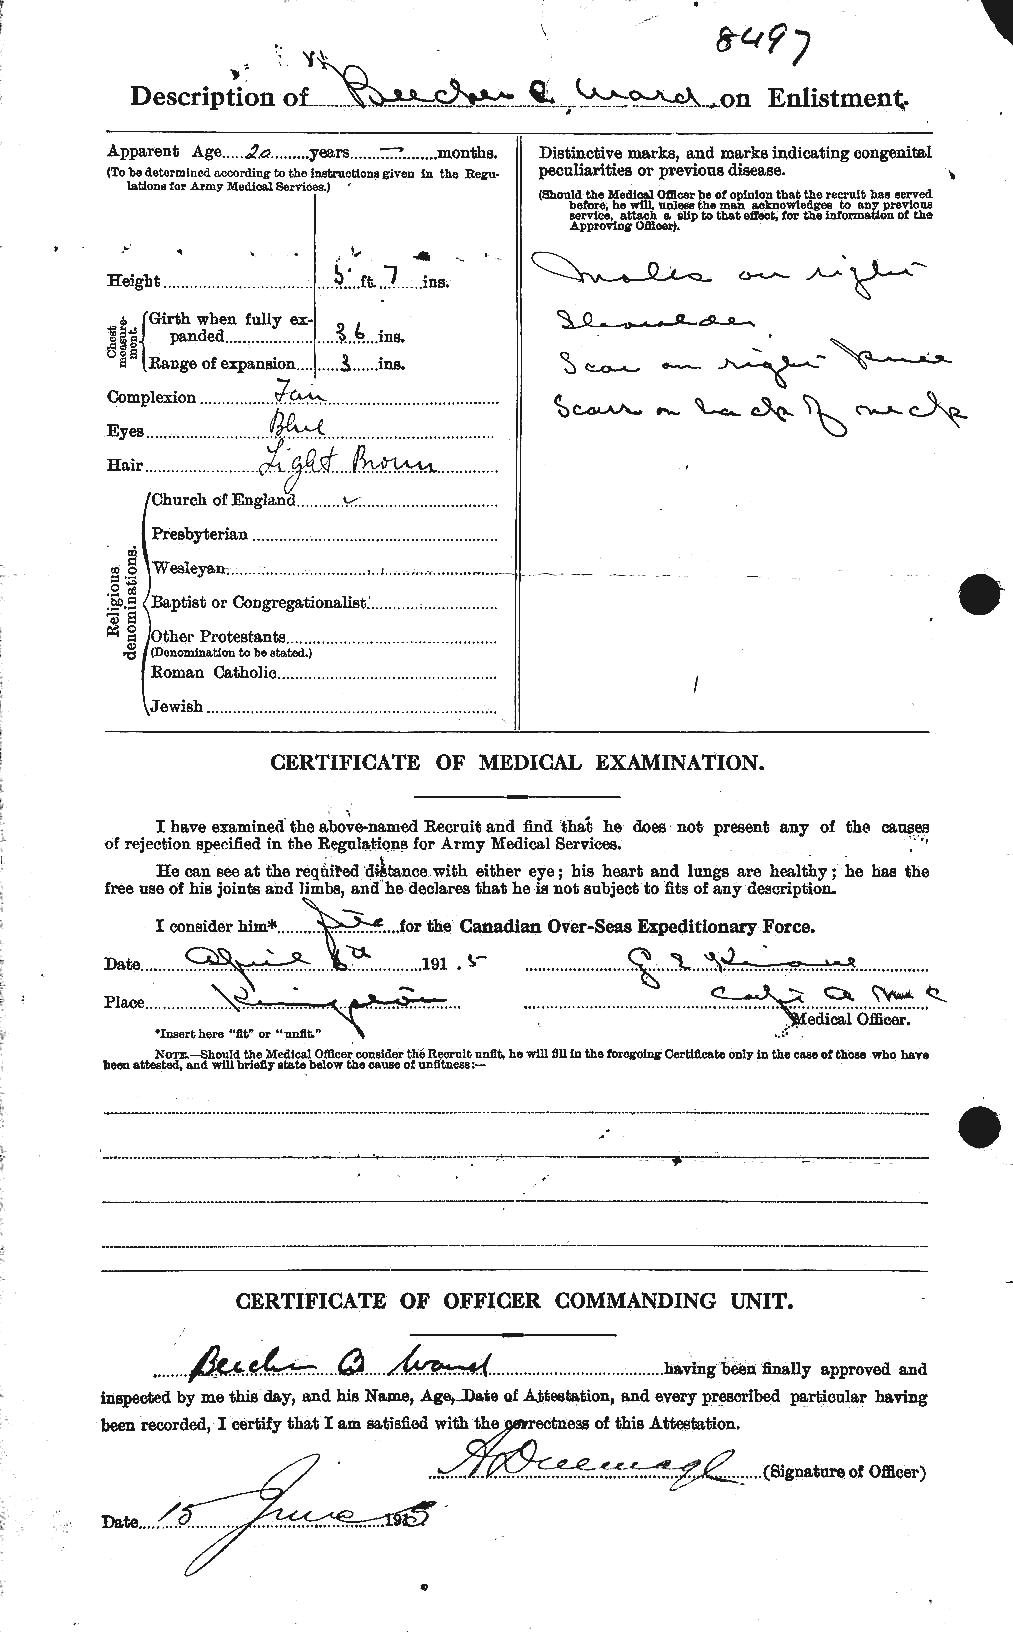 Personnel Records of the First World War - CEF 655161b